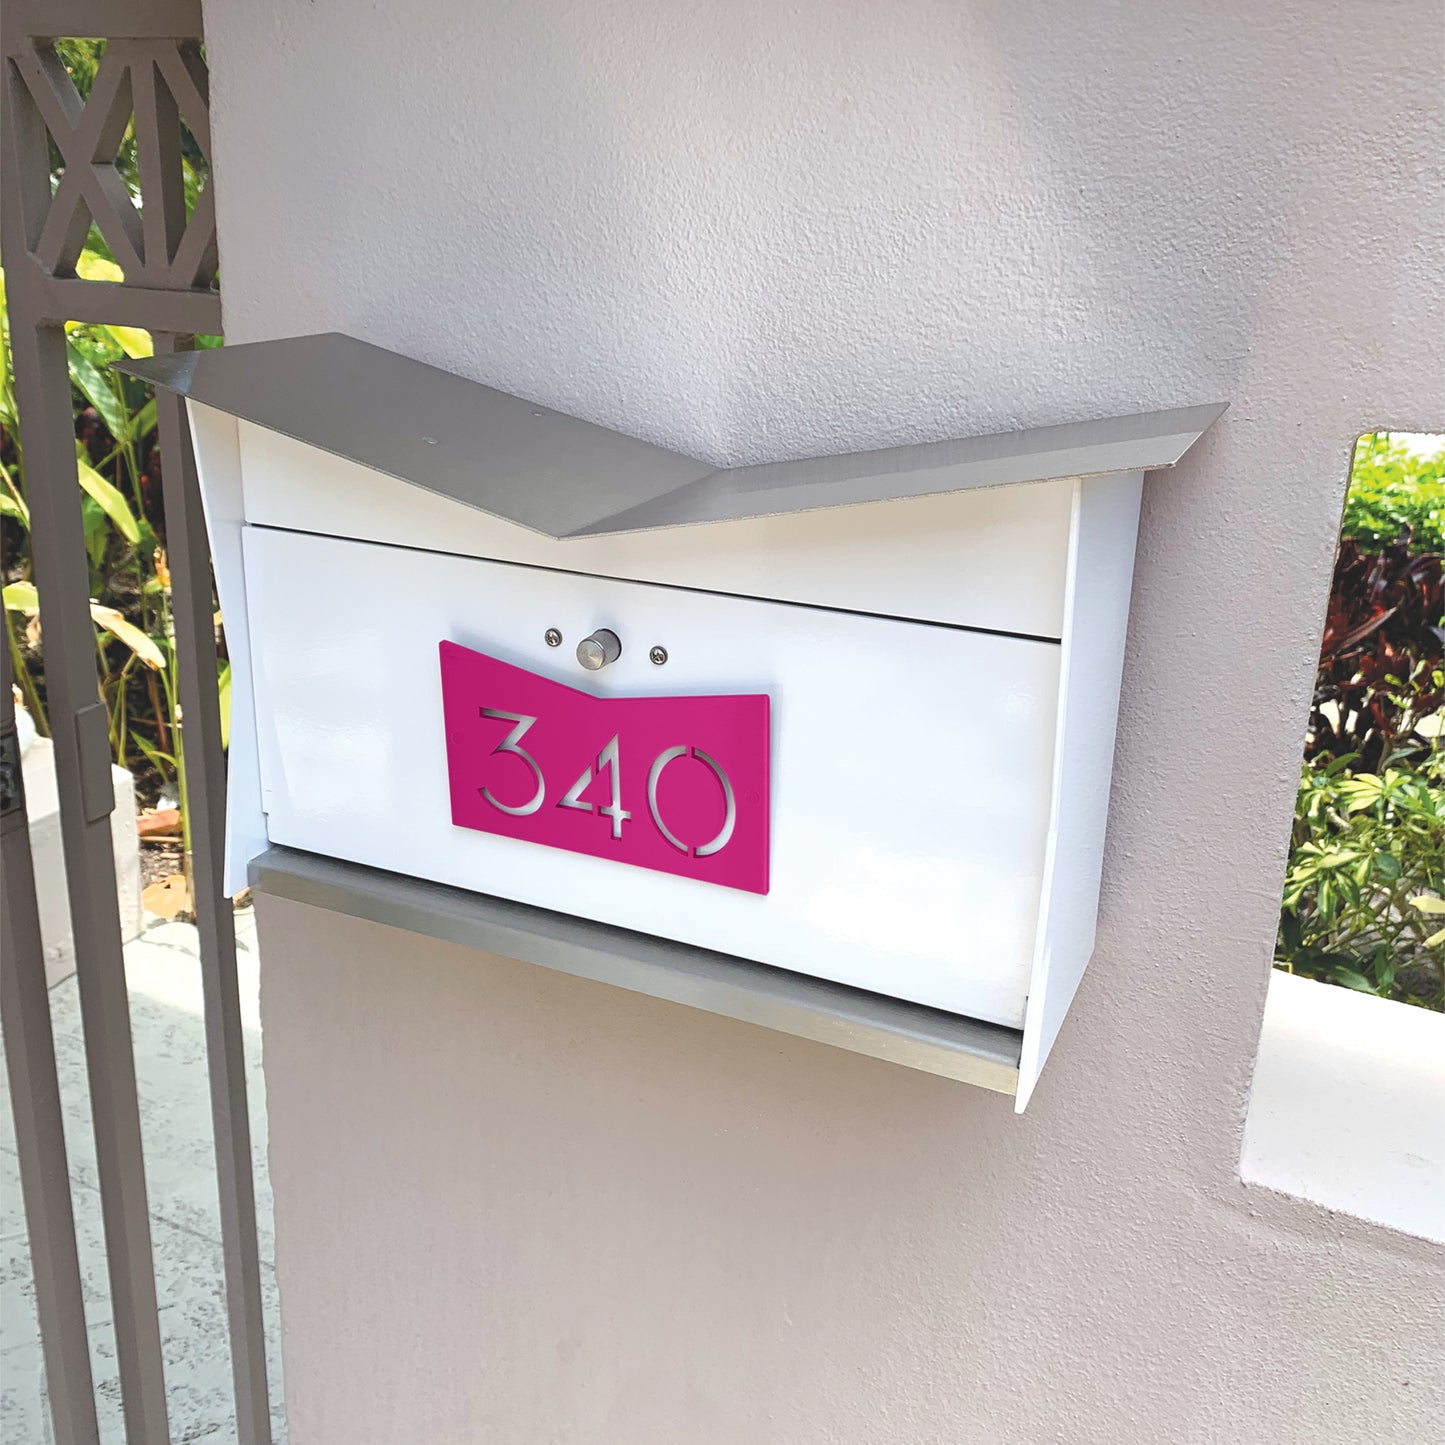 Wall Mount Mailbox mounted to outdoor wall. ButterFly Box in arctic white and neon pink